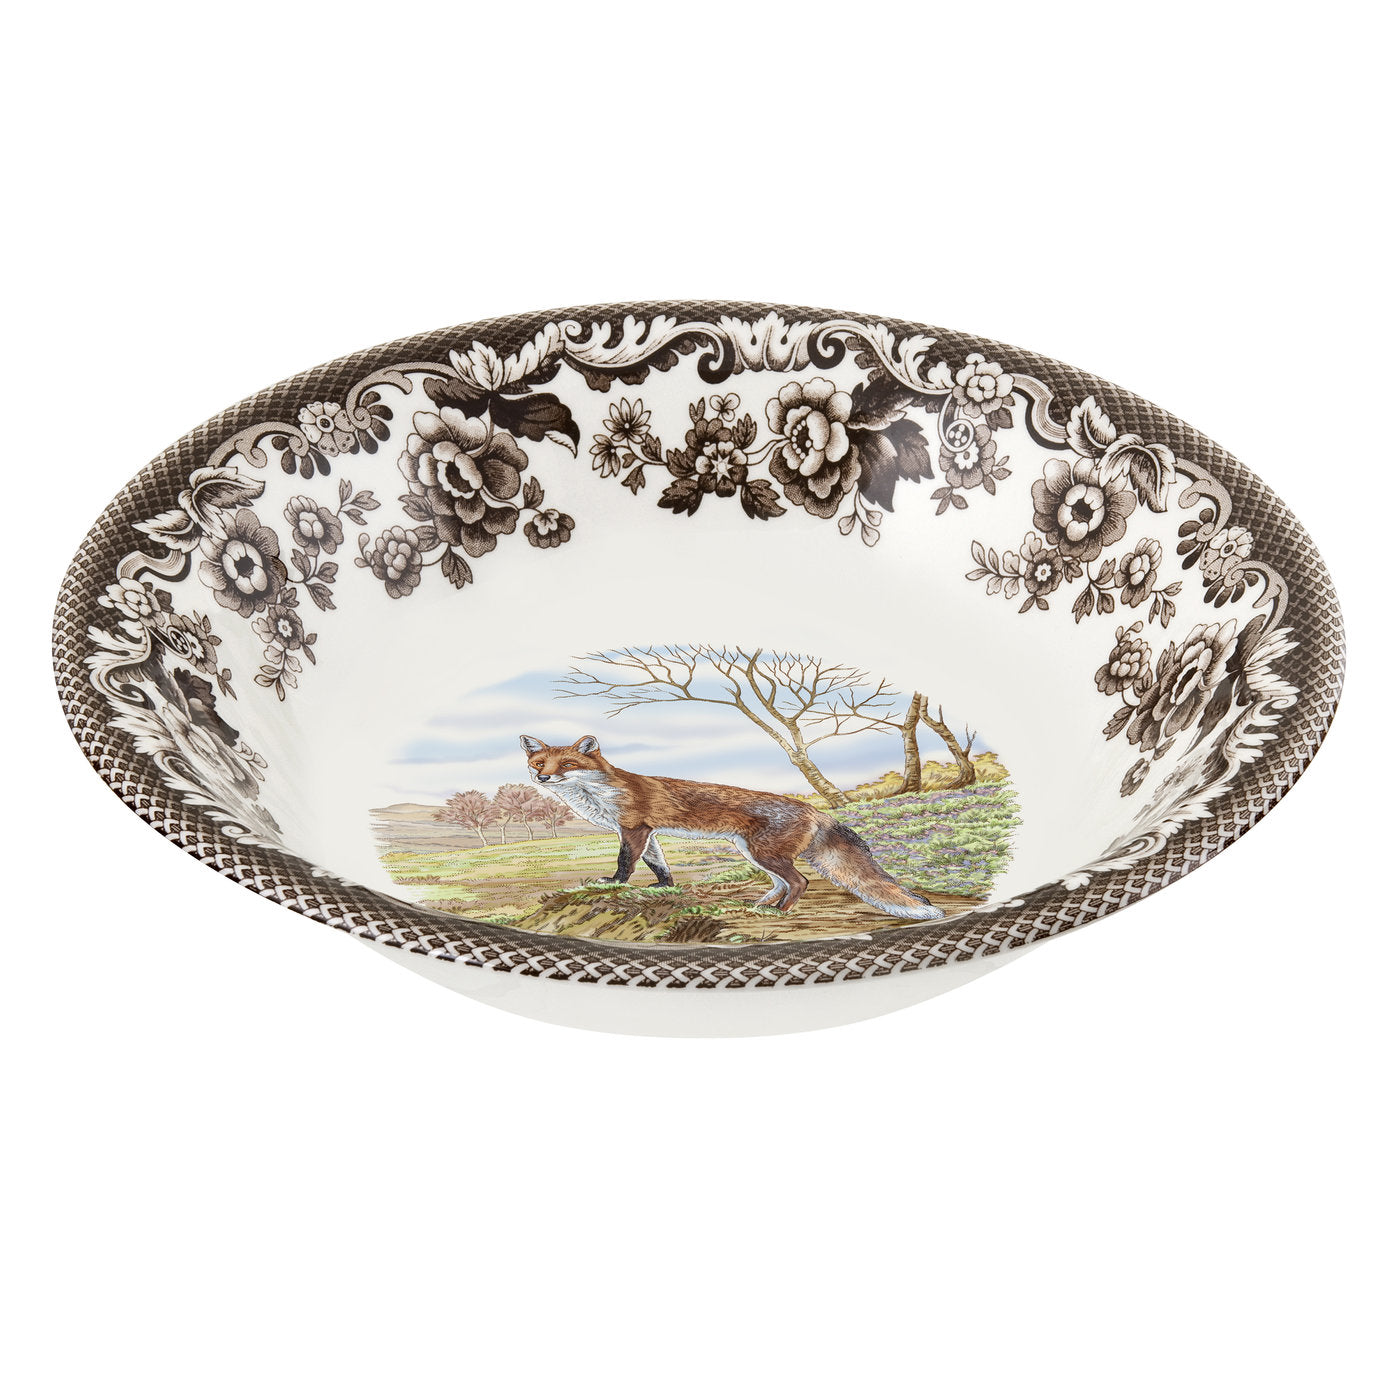 Spode Woodland Ascot Cereal Bowl, Red Fox